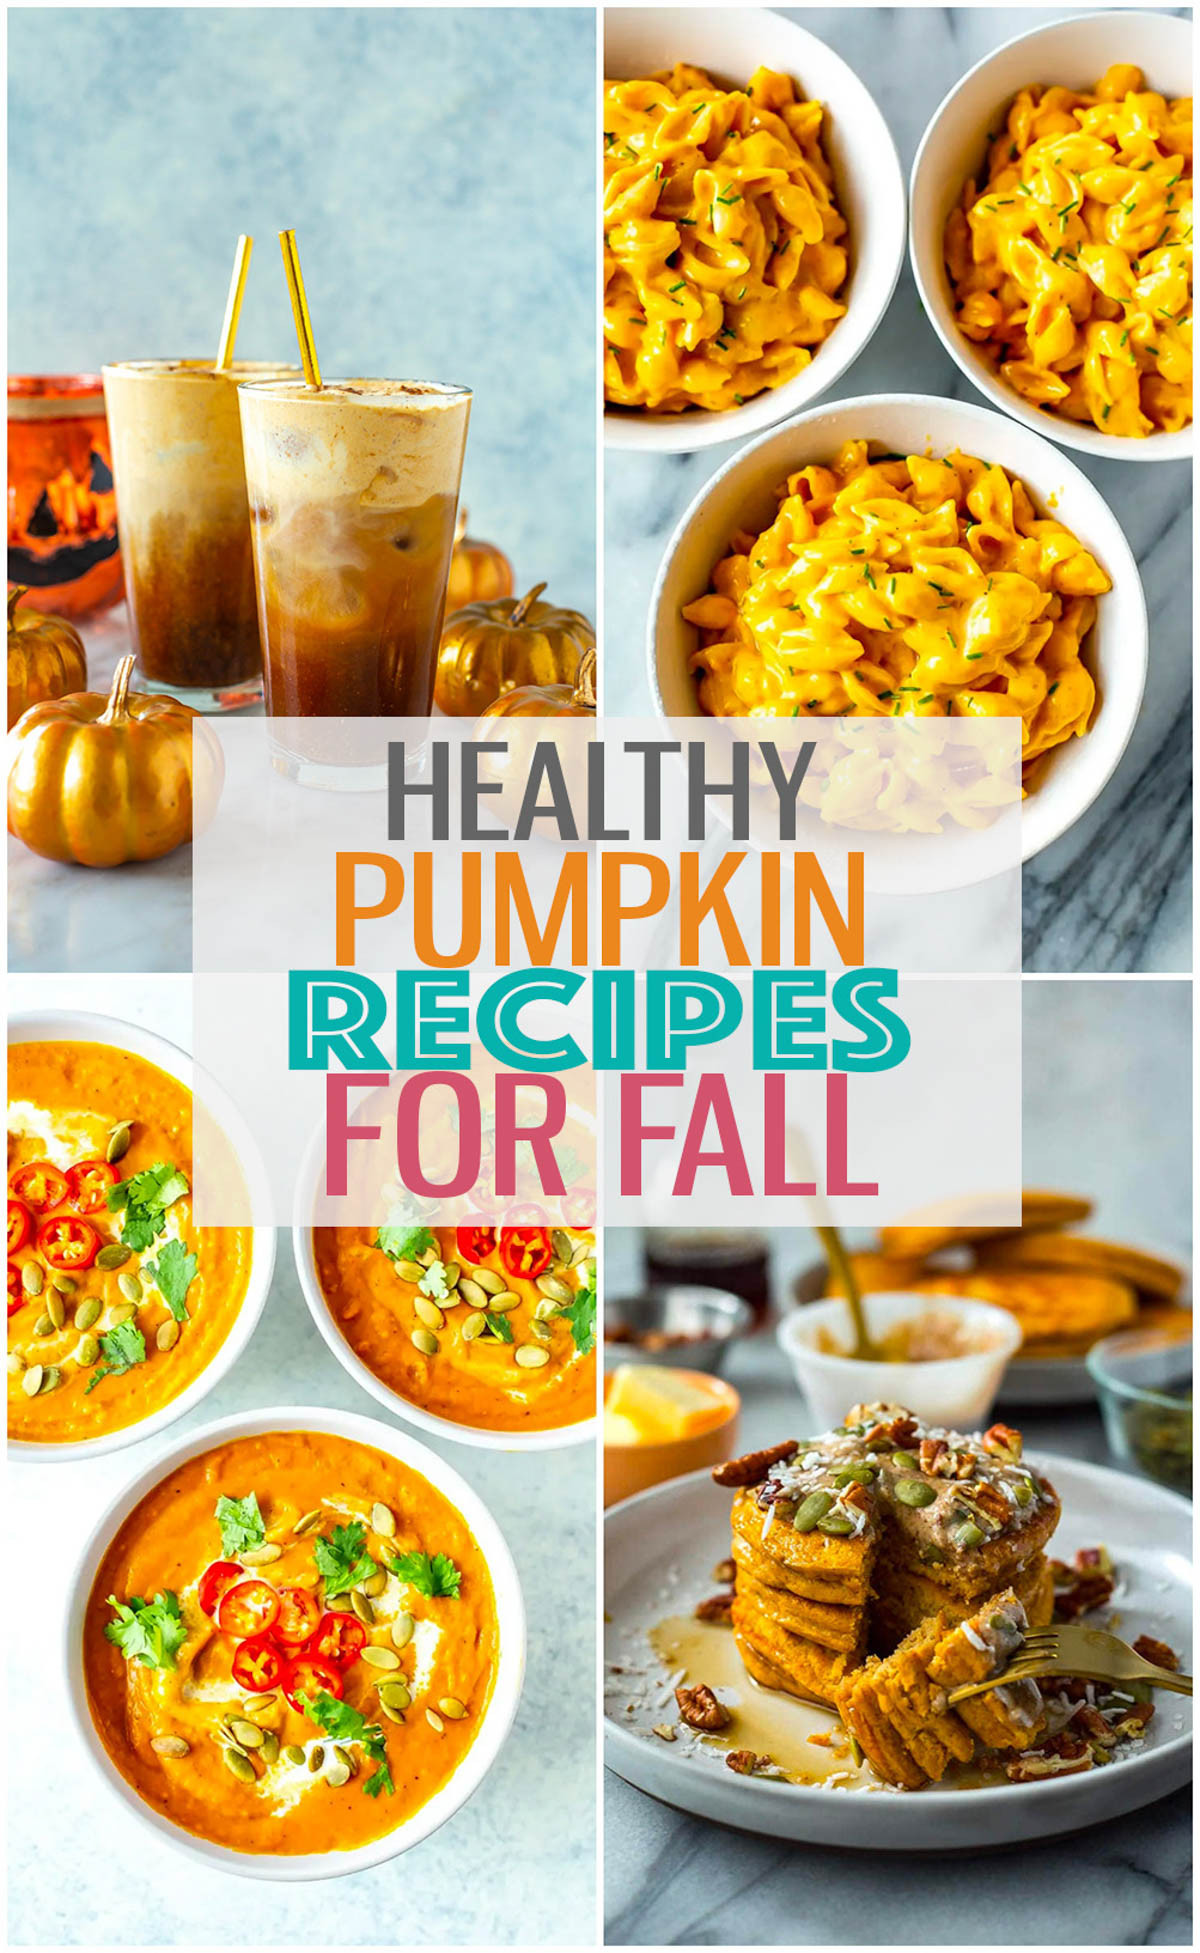 A collage of four different pumpkin recipes with the text "Healthy Pumpkin Recipes for Fall" layered over top.